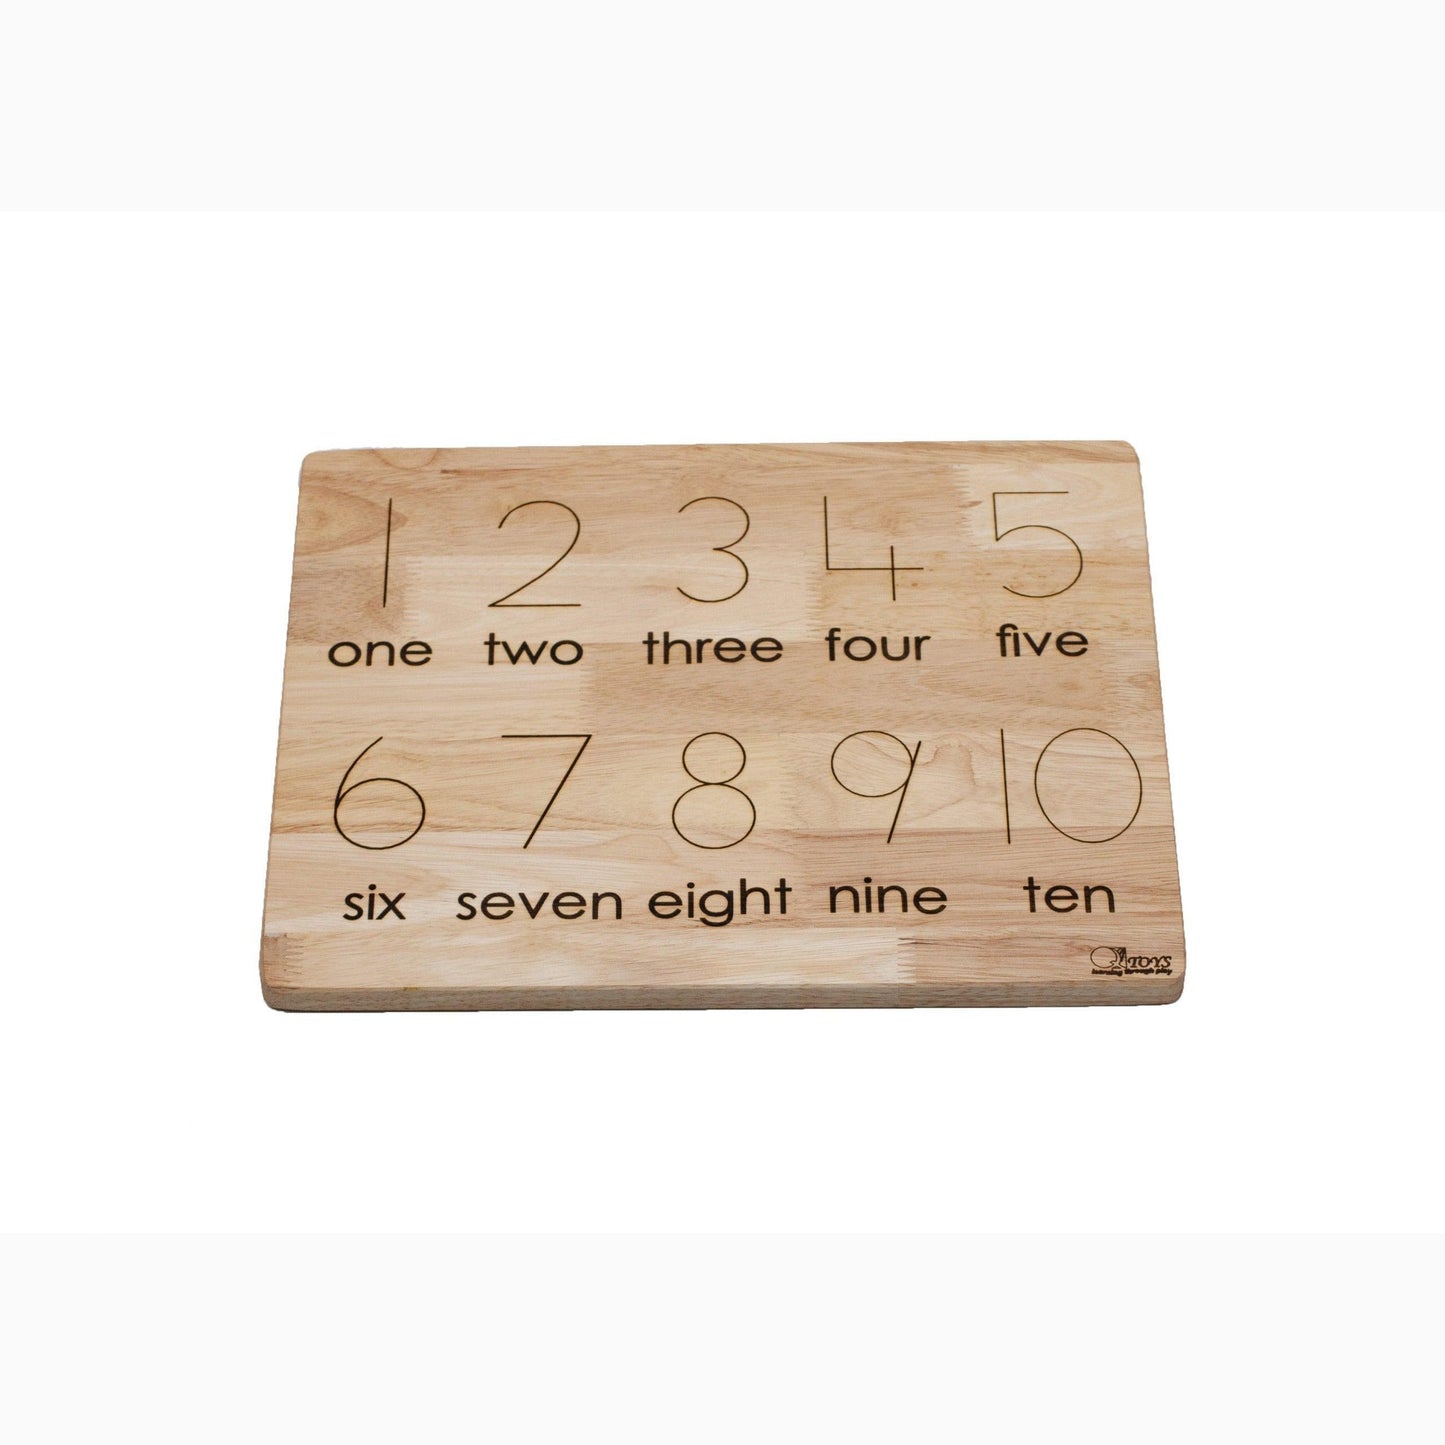 Reversible Numeracy Skill Enhancing Counting Board